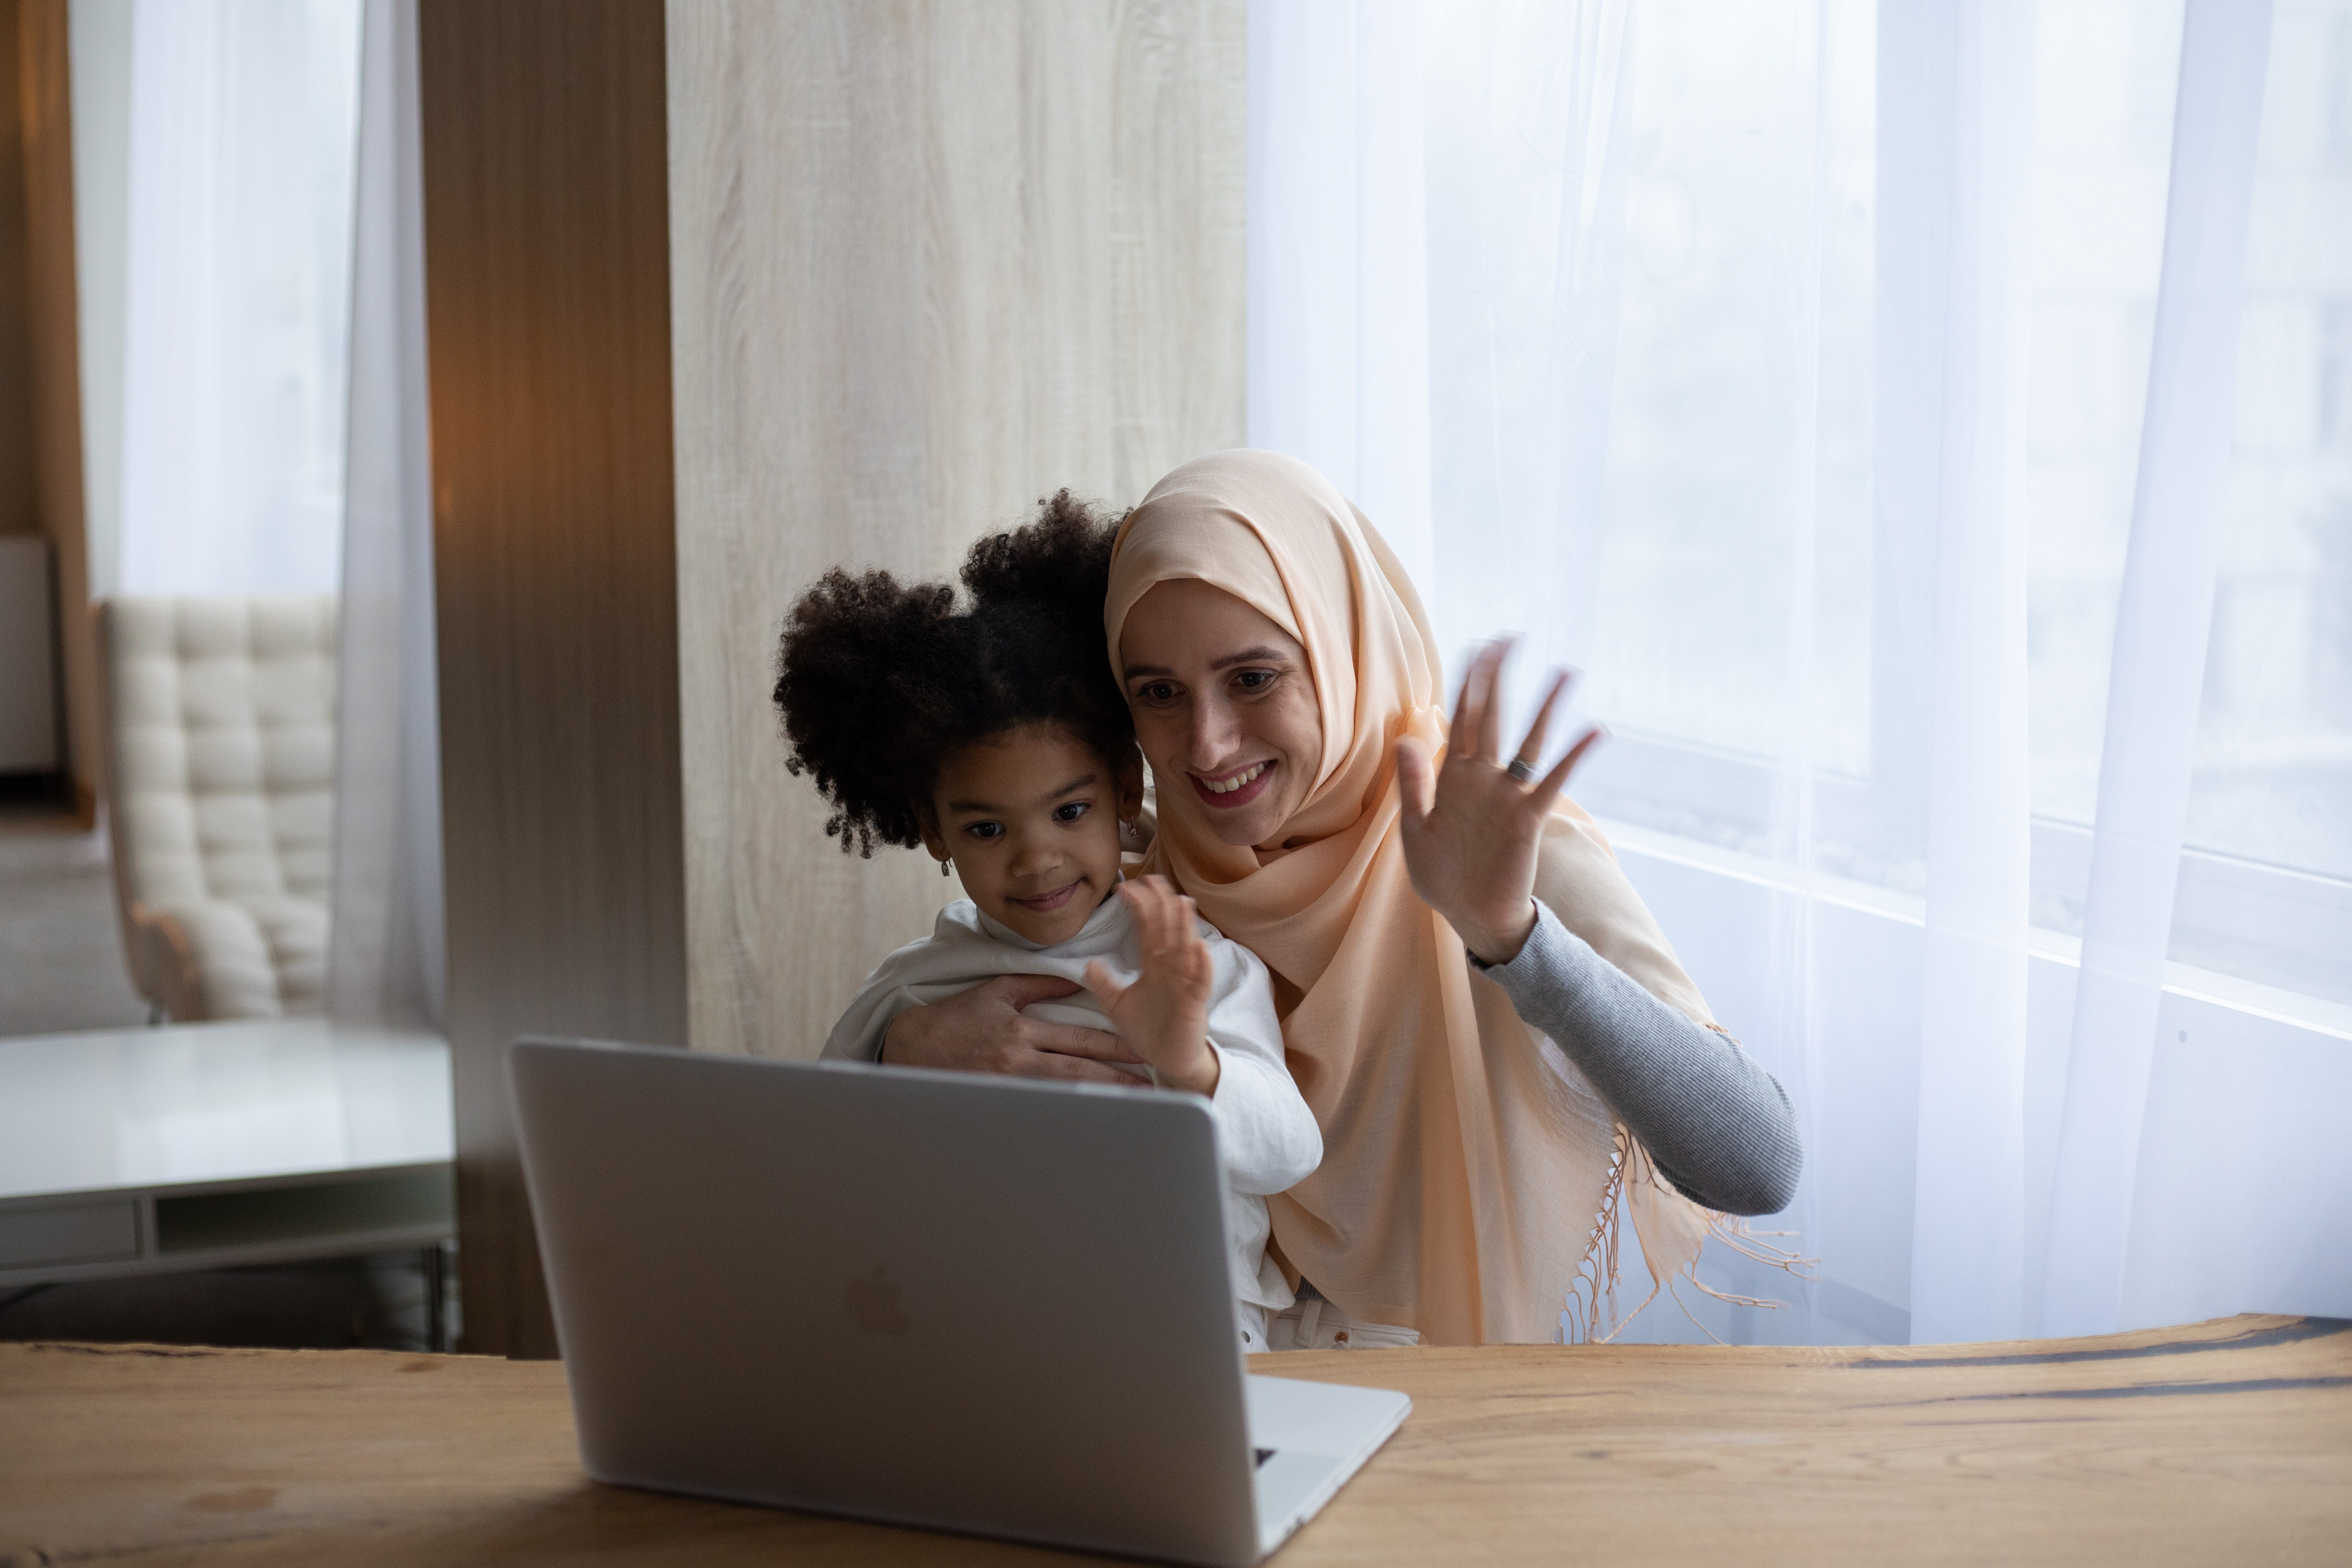 A mother and her young daughter waving at a laptop